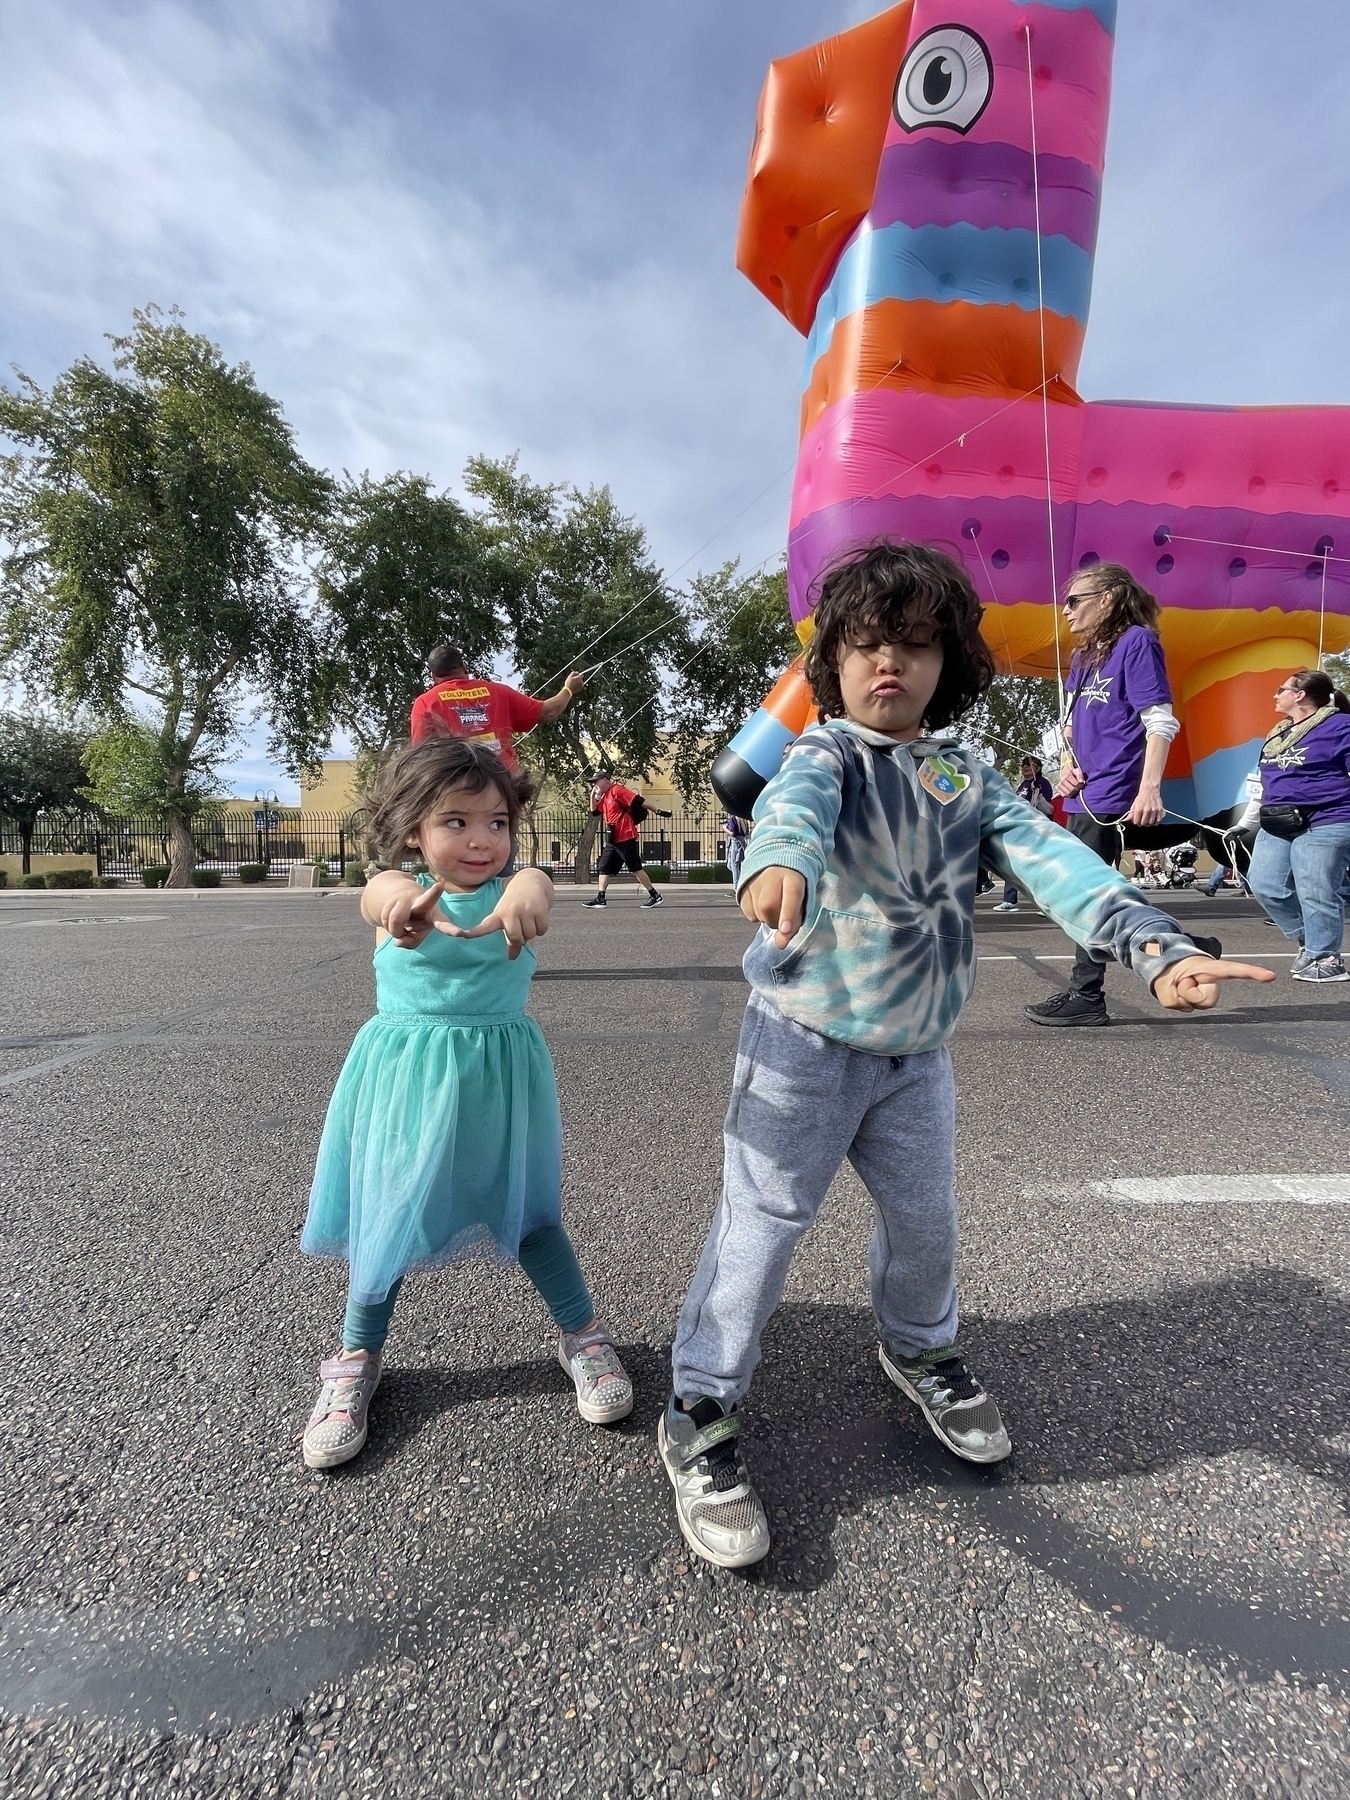 Two young children dancing in front of large piñata parade float